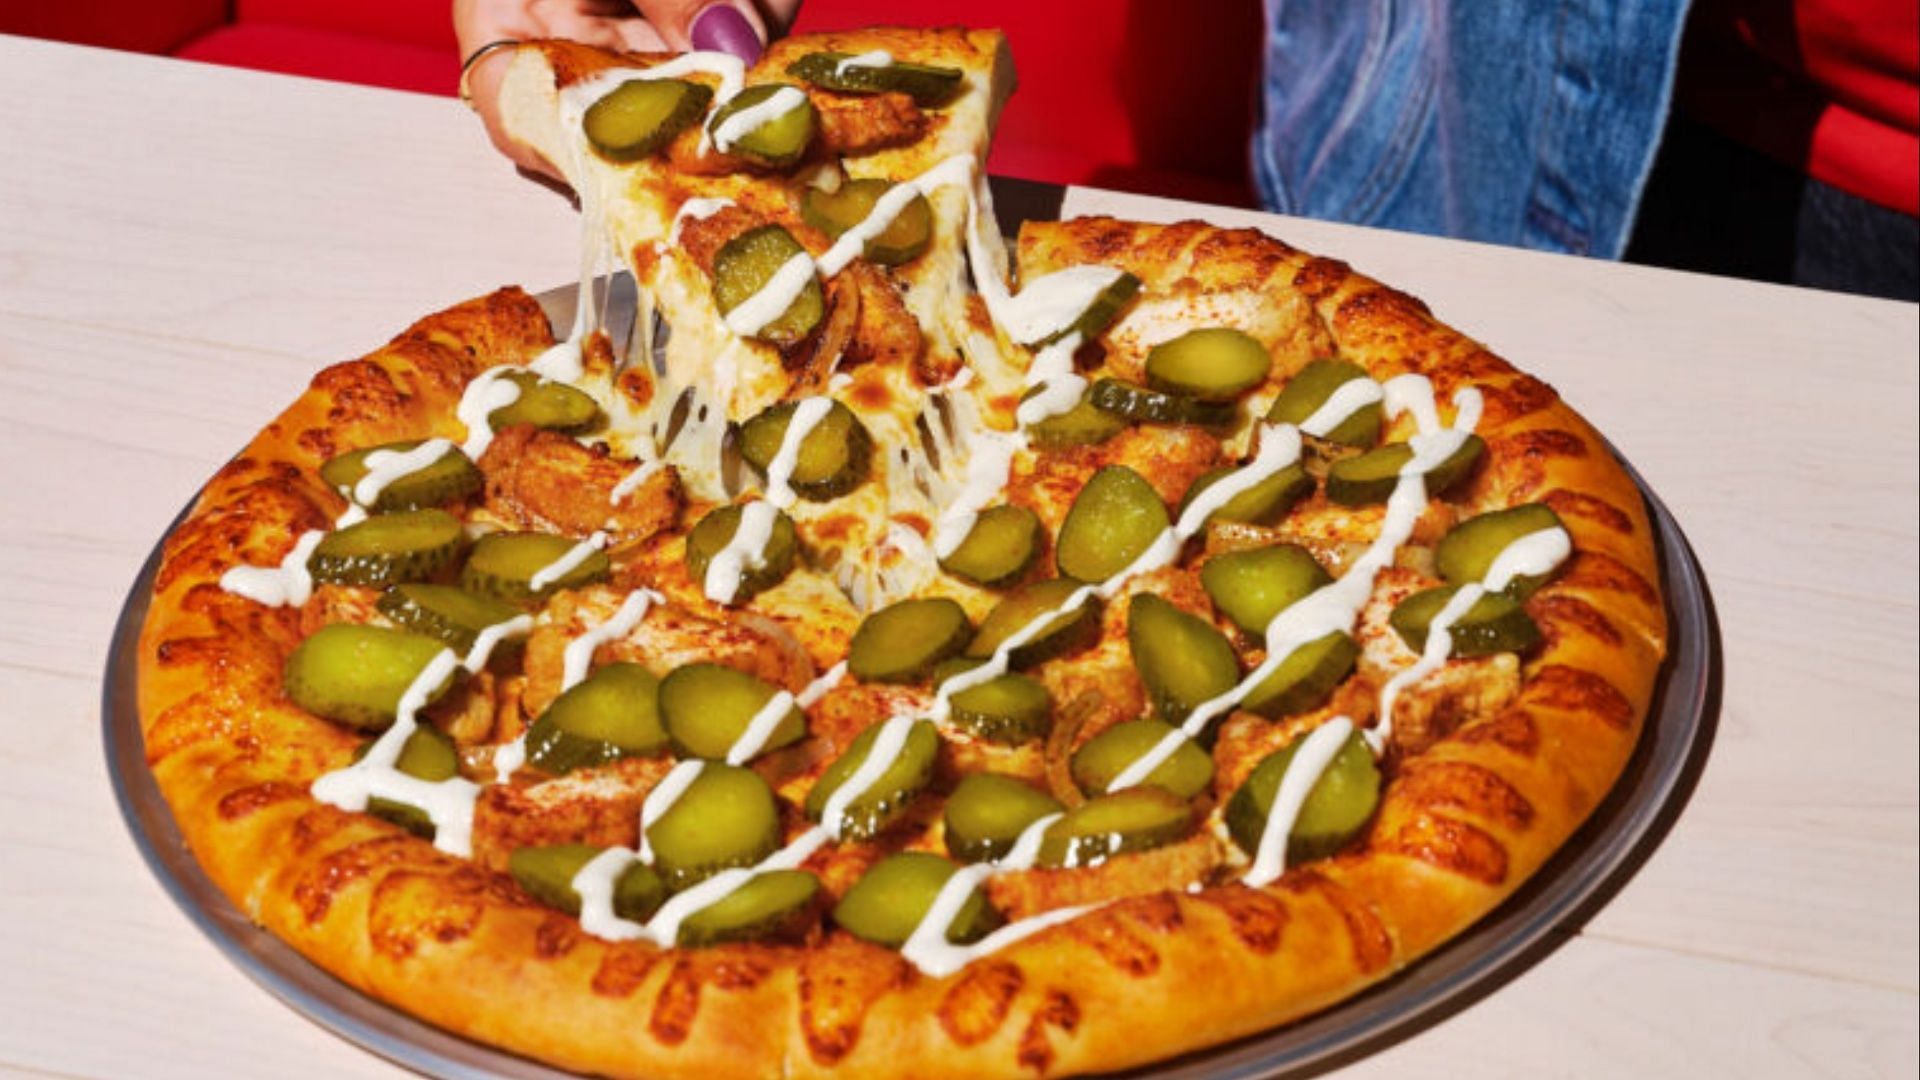 The Pickle Pizza can only be ordered at 932 8th Avenue in New York City location until June 11 or till supplies last (Image via Pizza Hut)